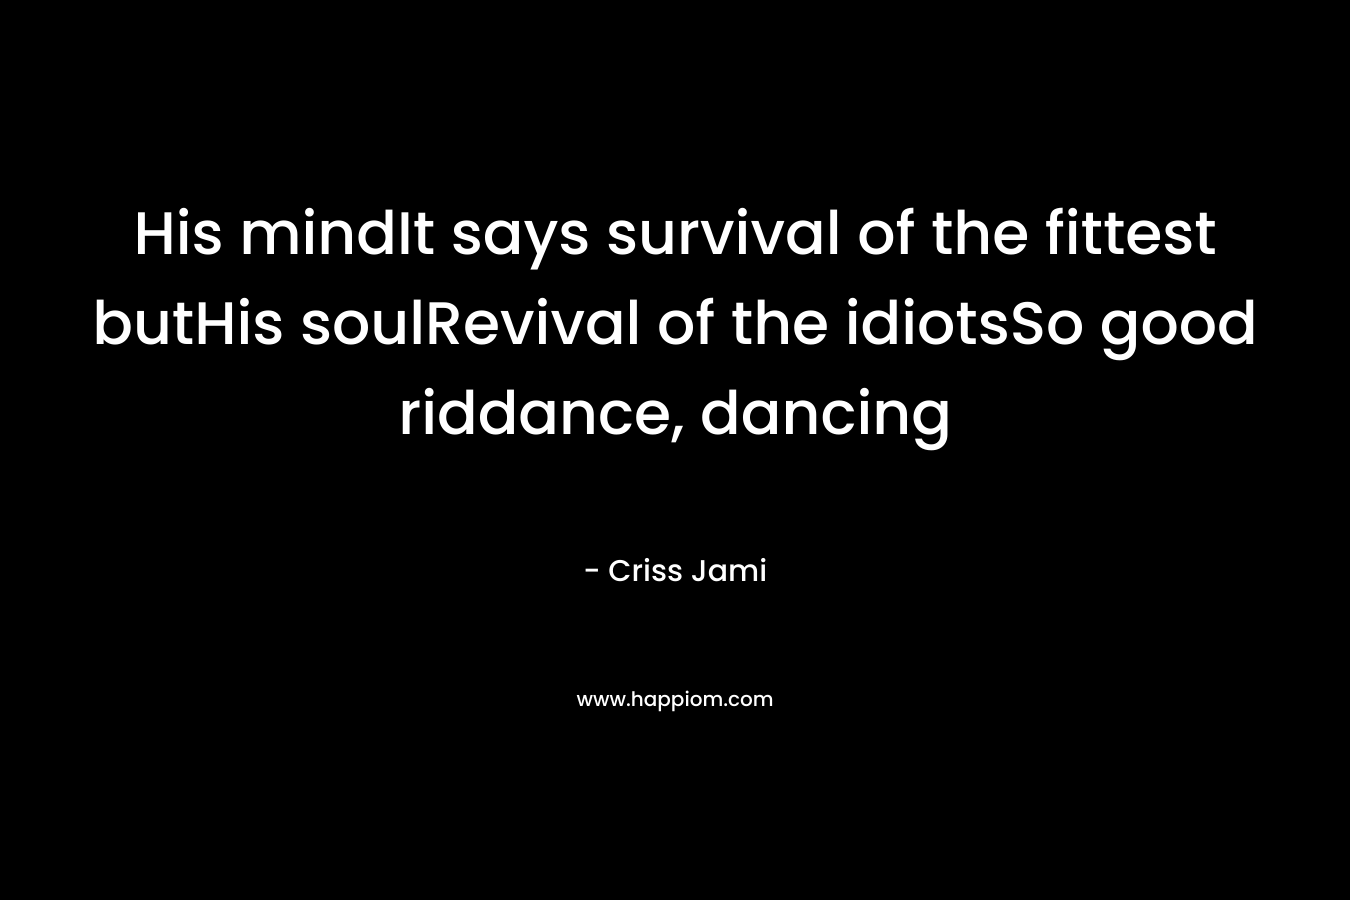 His mindIt says survival of the fittest butHis soulRevival of the idiotsSo good riddance, dancing – Criss Jami